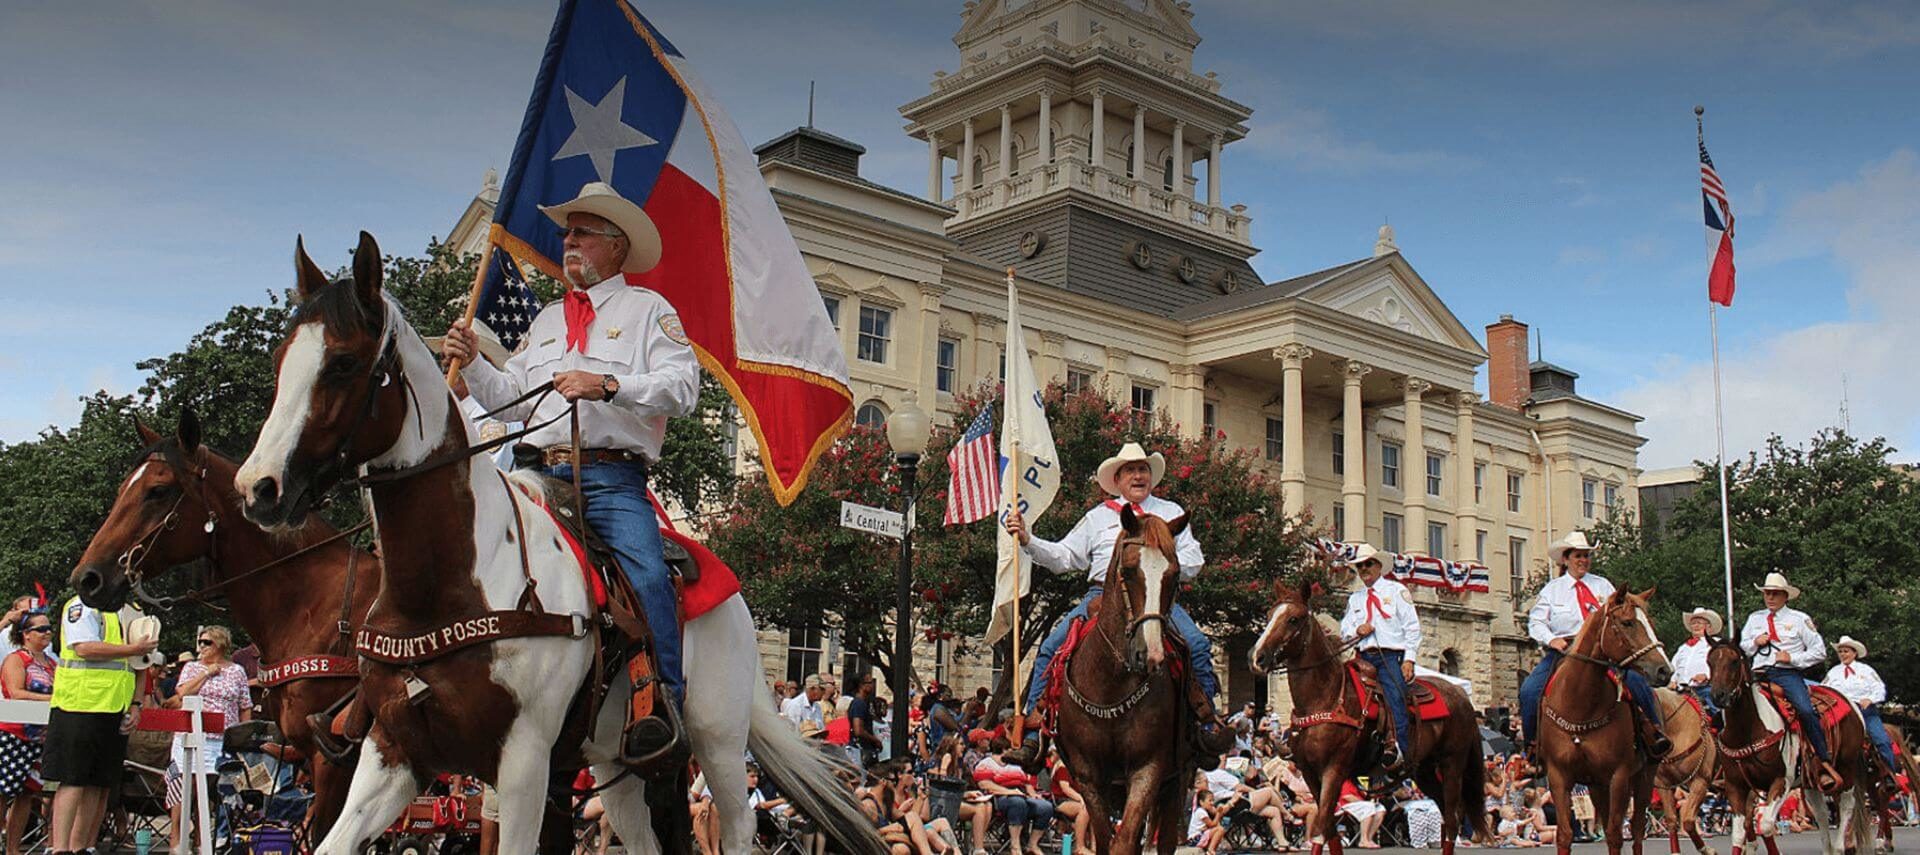 A group of men and women on horseback wearing white shirts, blue jeans, and white cowboy hats, holding various flags representing the US and Texas, in front of a multi story brick building